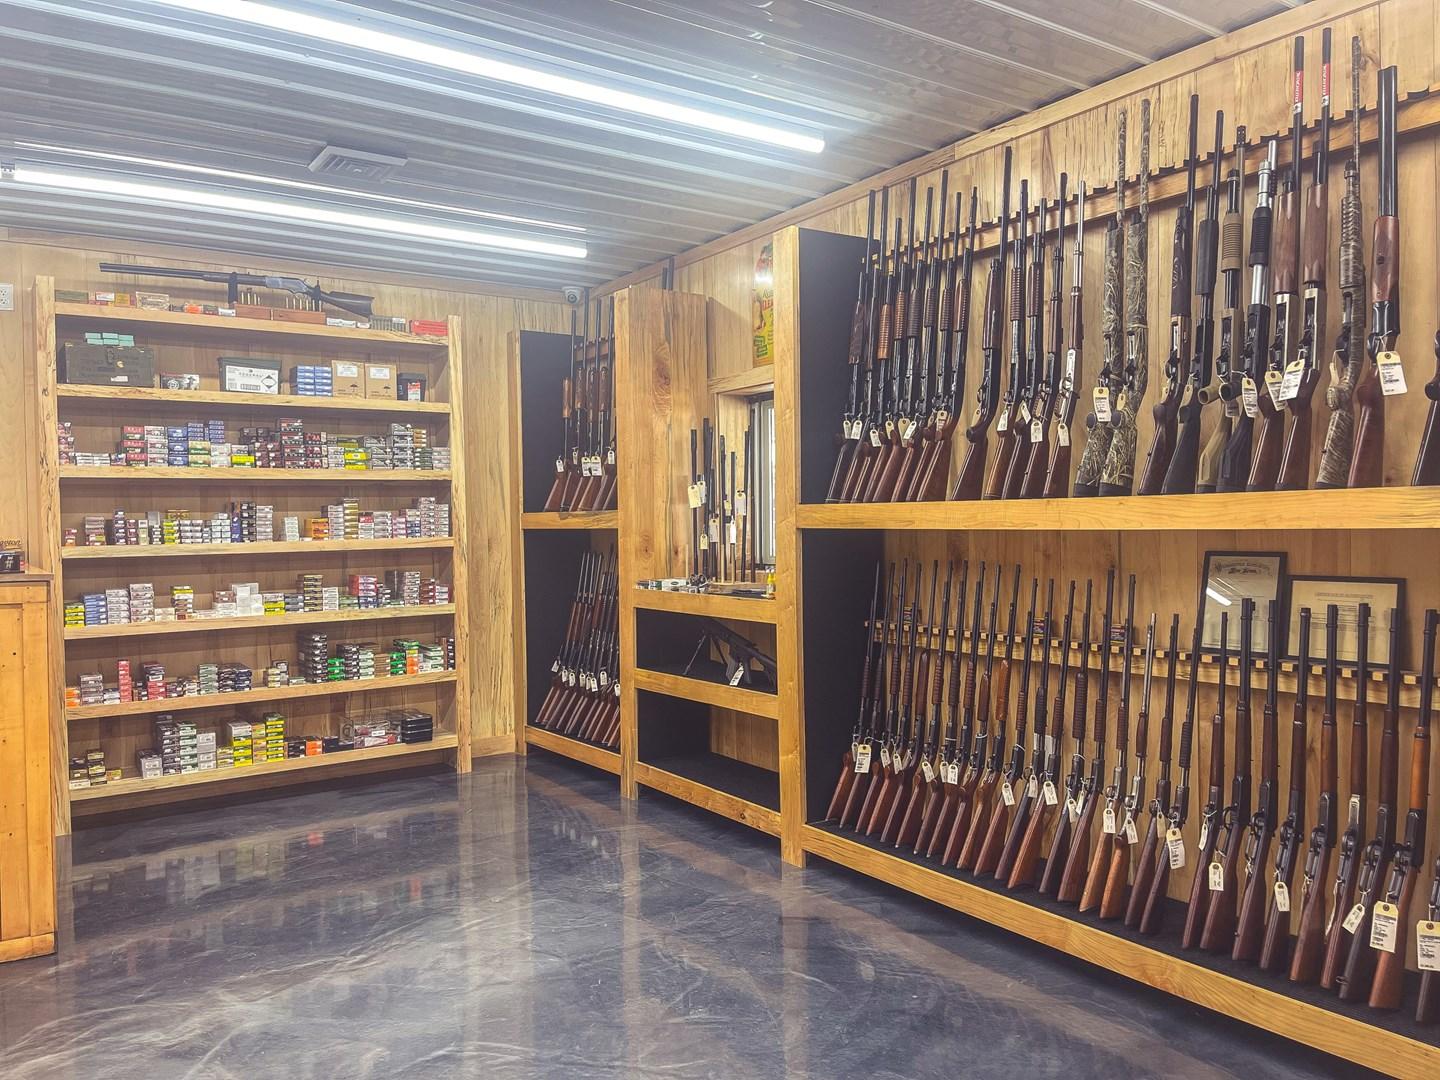 2nd Amendment Supply And Manufacturing Gun Showroom 2 (Knightstown, Indiana)